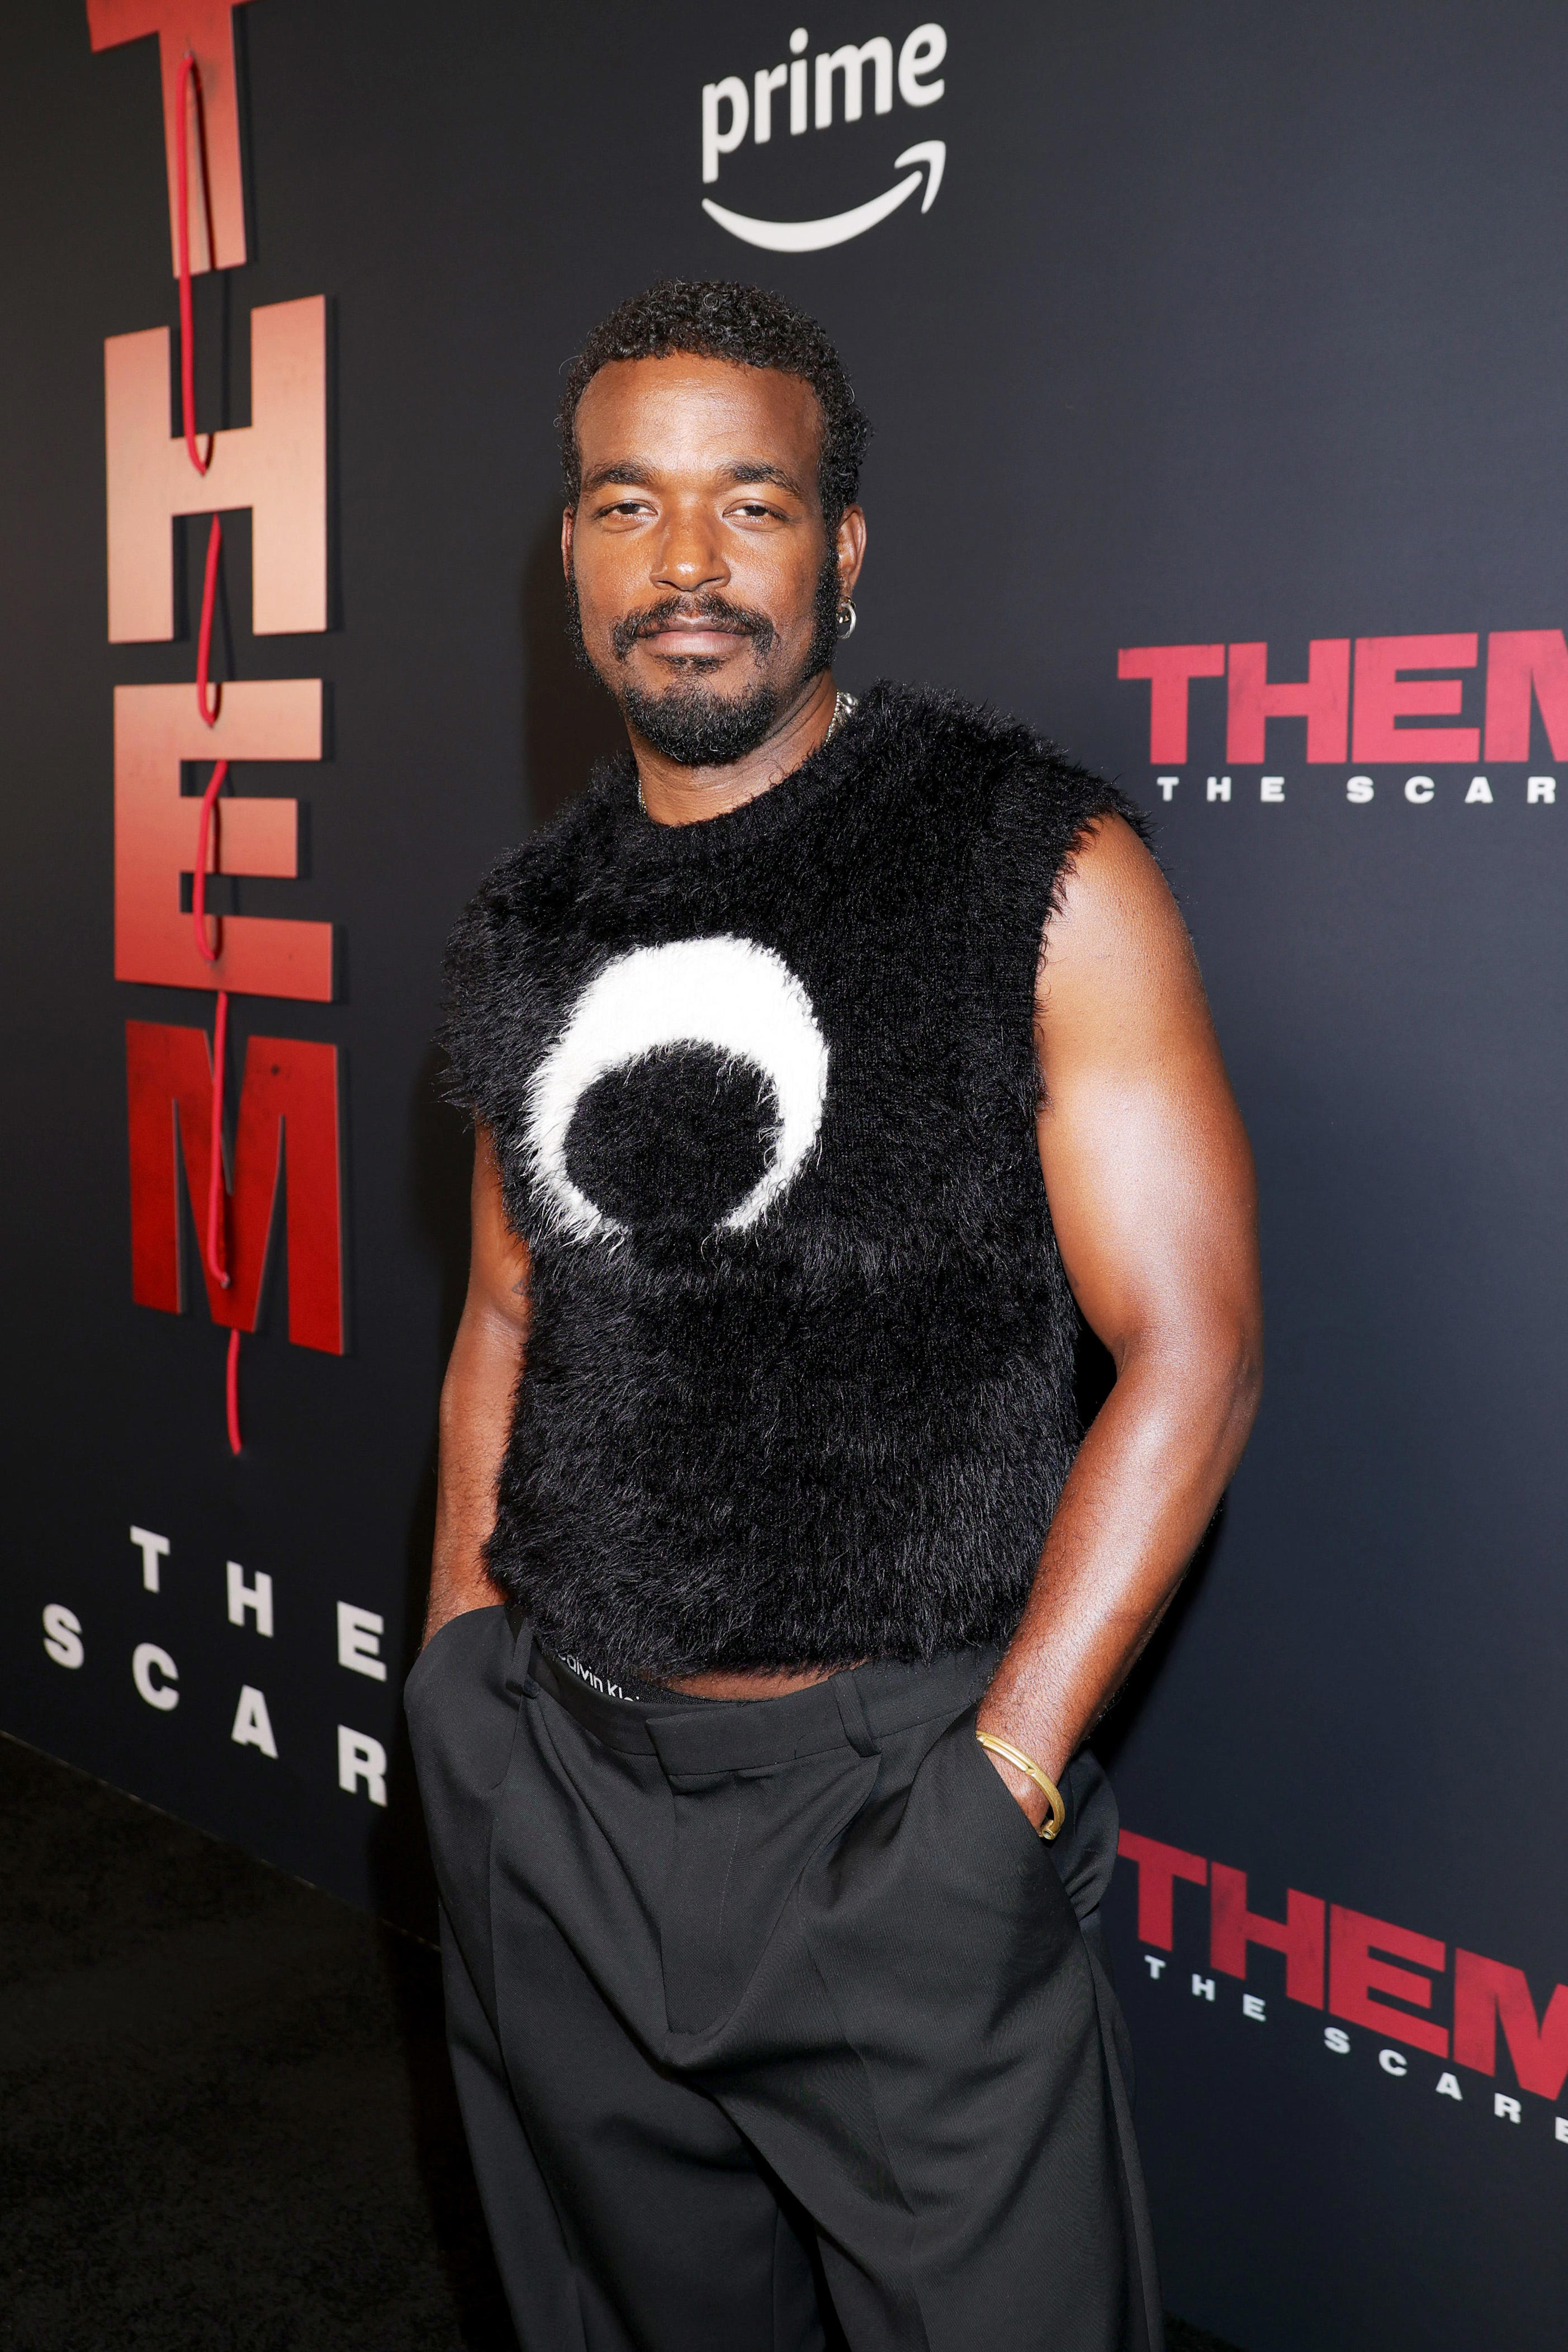 who is luke james? why fans are commending the actor's breakout role in 'them: the scare'